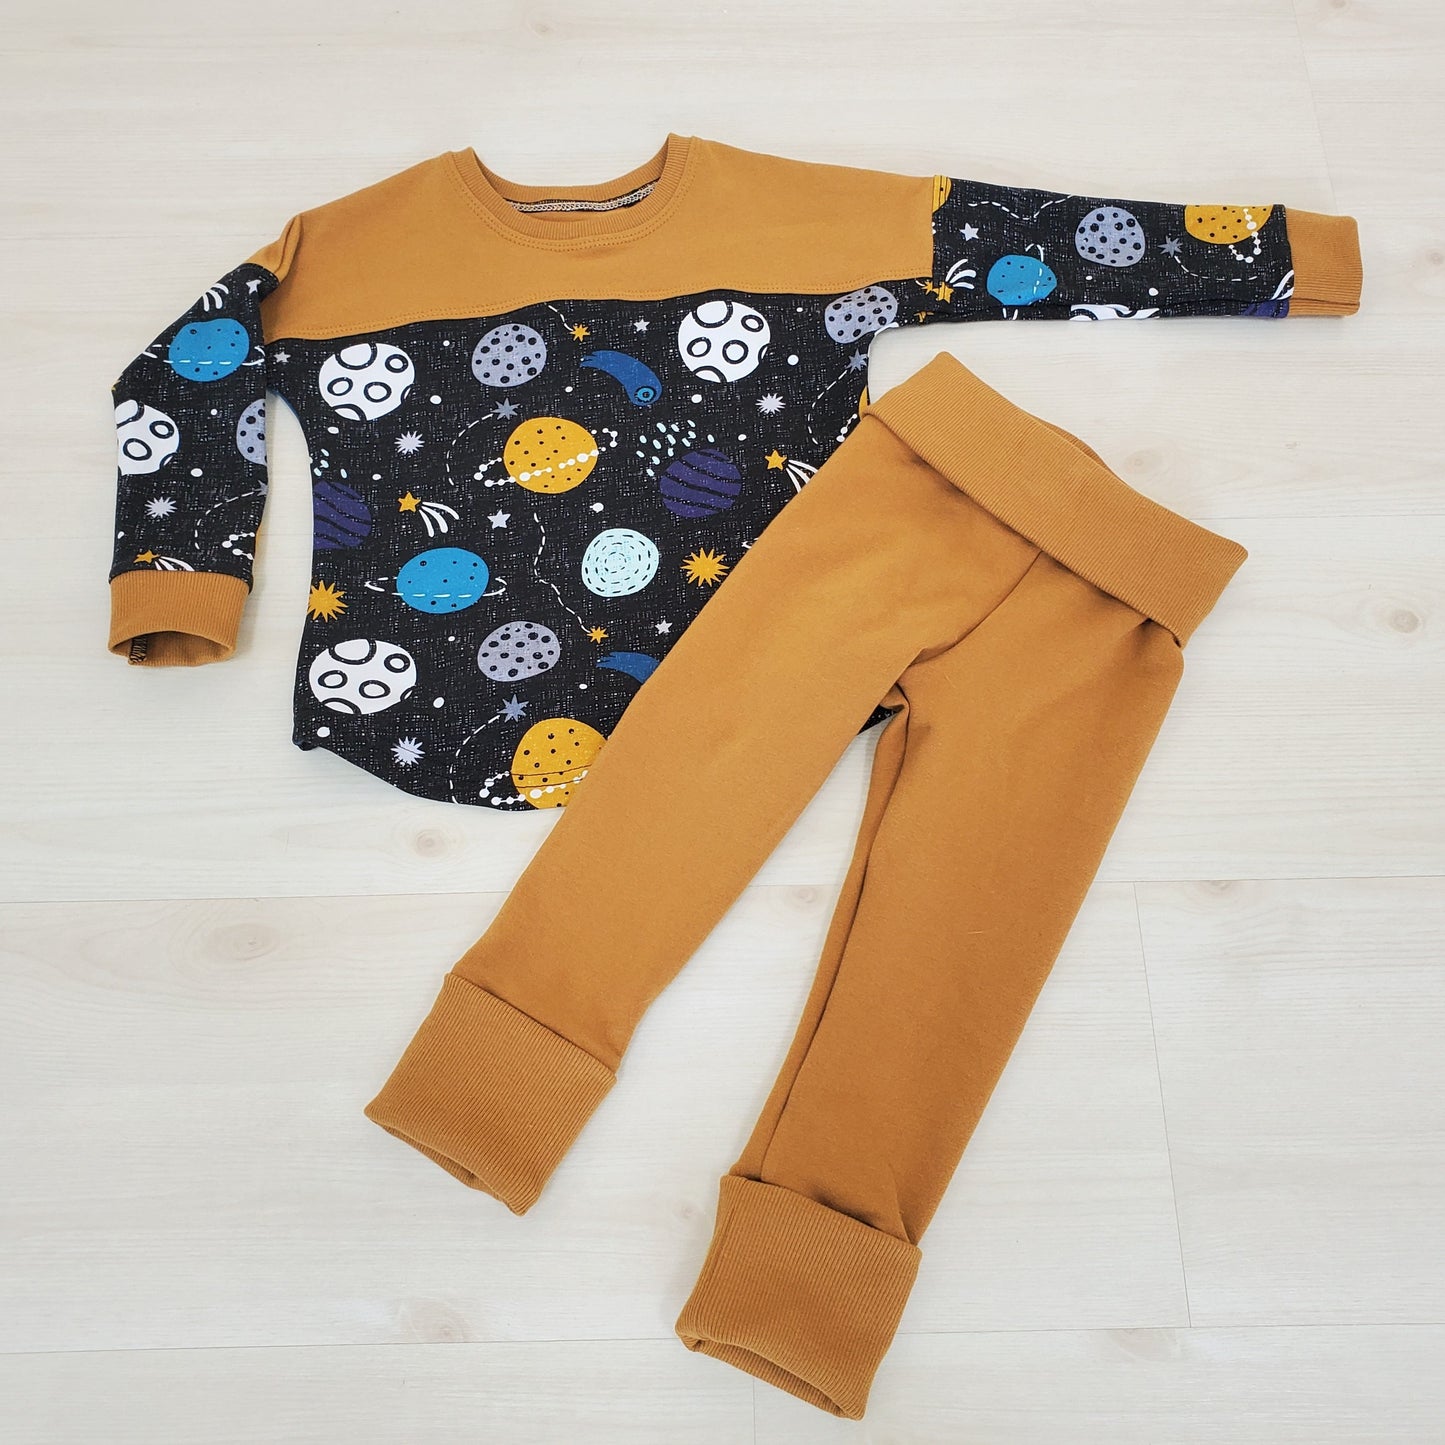 Planet Shirt for Kids in Organic Cotton